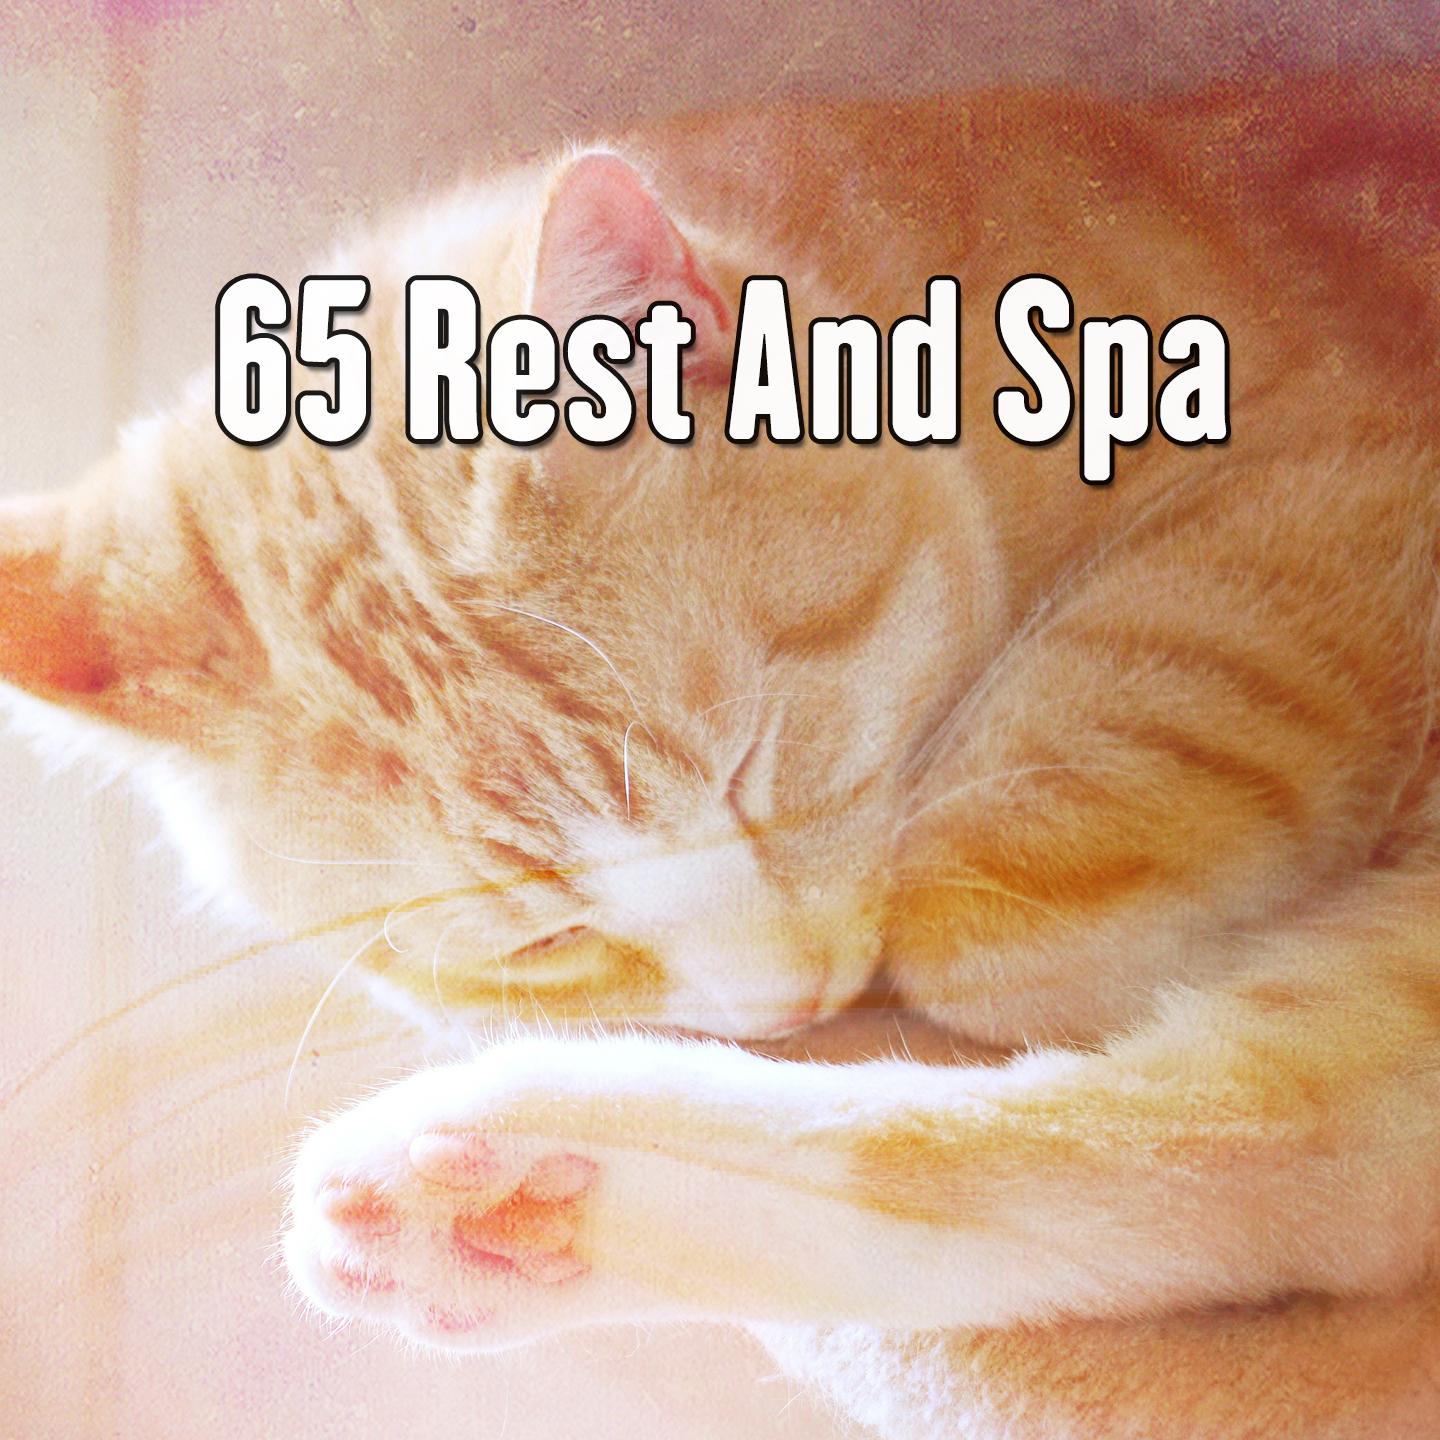 65 Rest And Spa